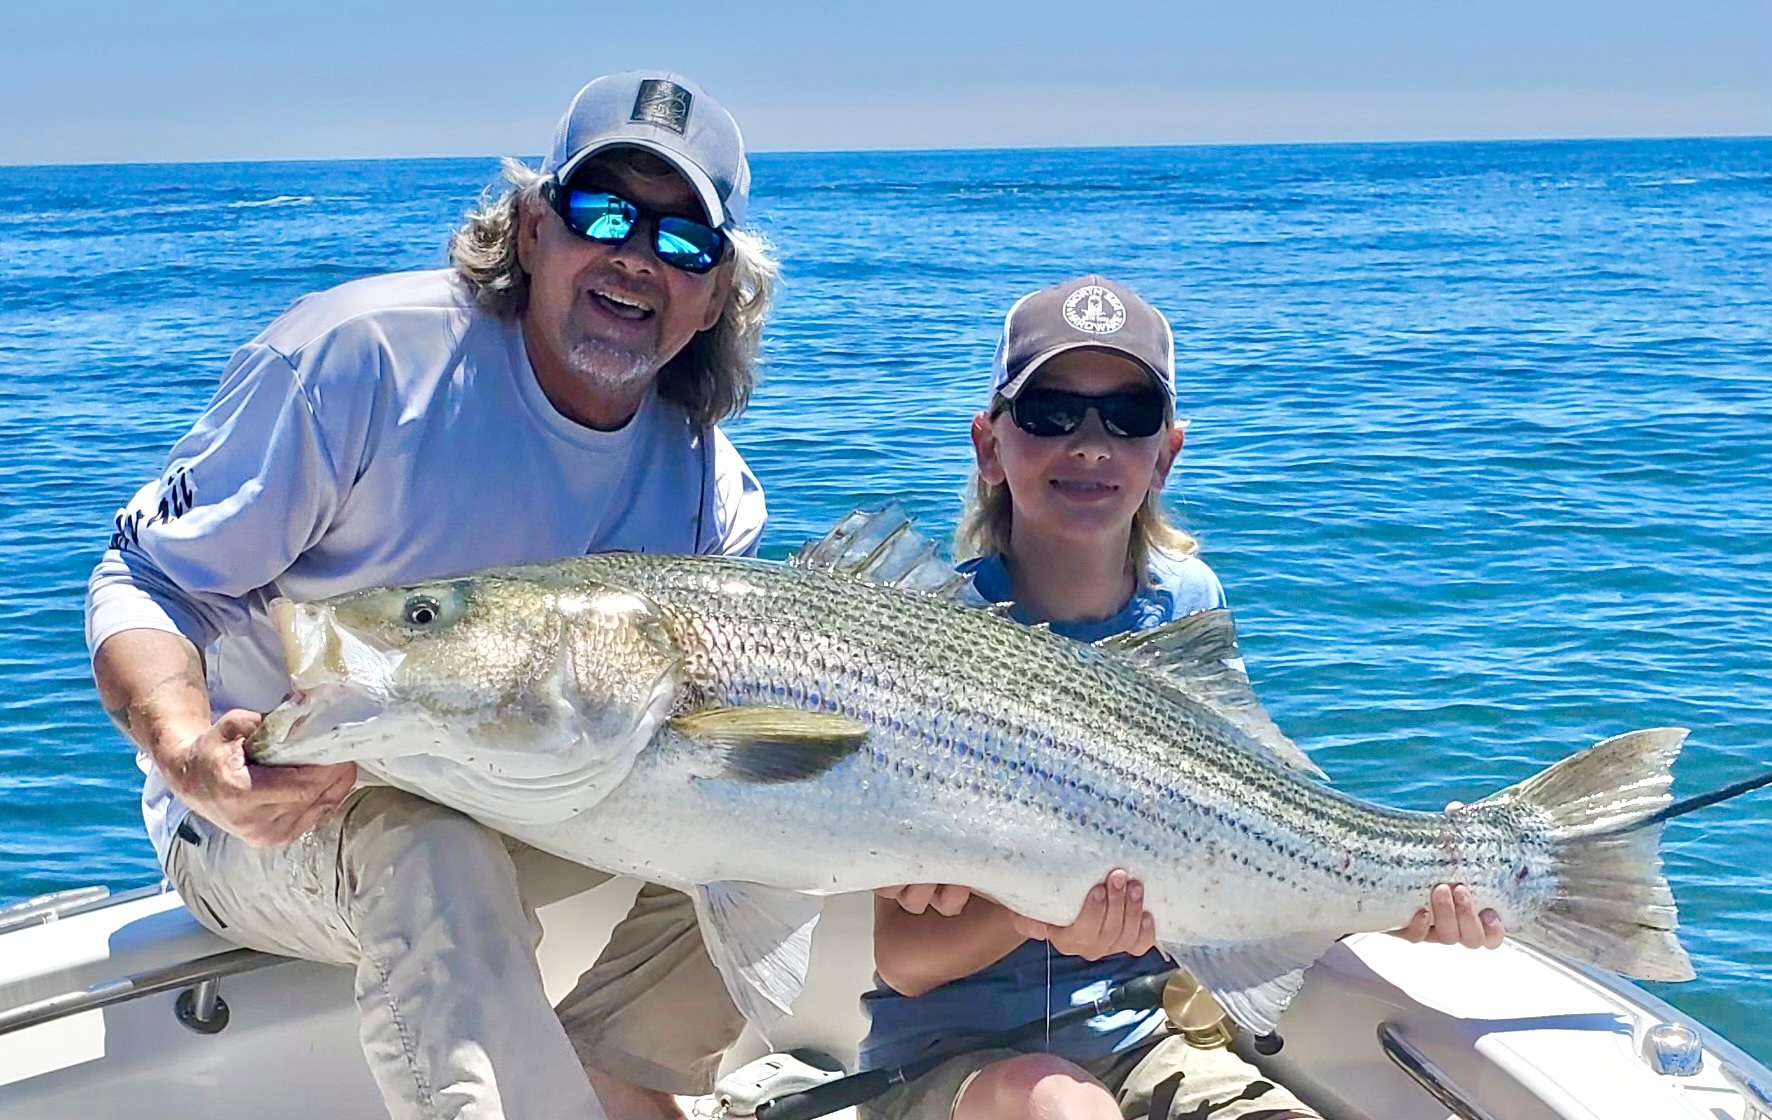 Steve and Devin Petras heft a striped bass that bottomed out a 60-pound scale, from the waters off Shinnecock Inlet last week.